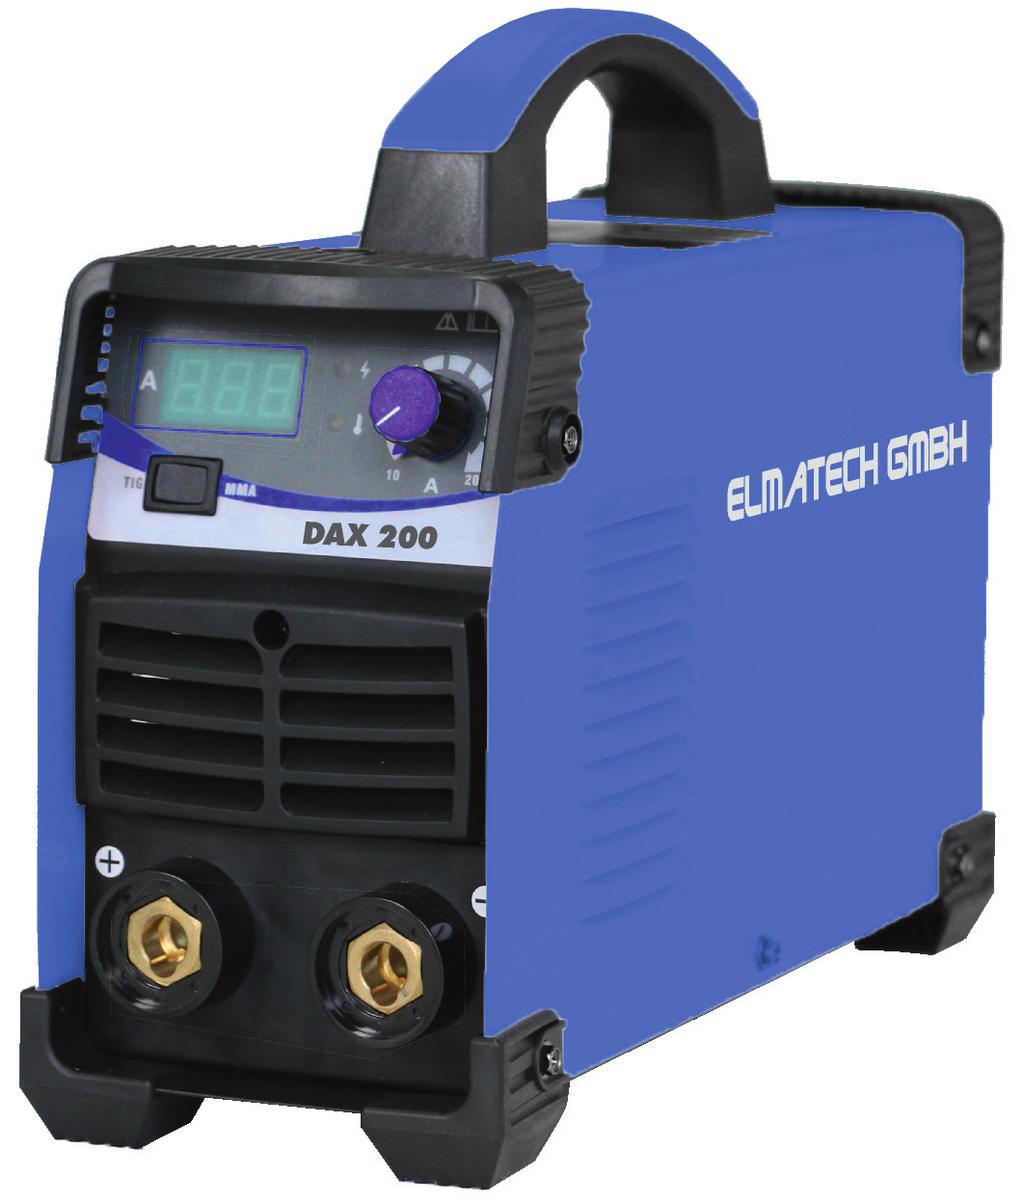 Handy and robust welding rectifier with modern inverter technology and digital display.